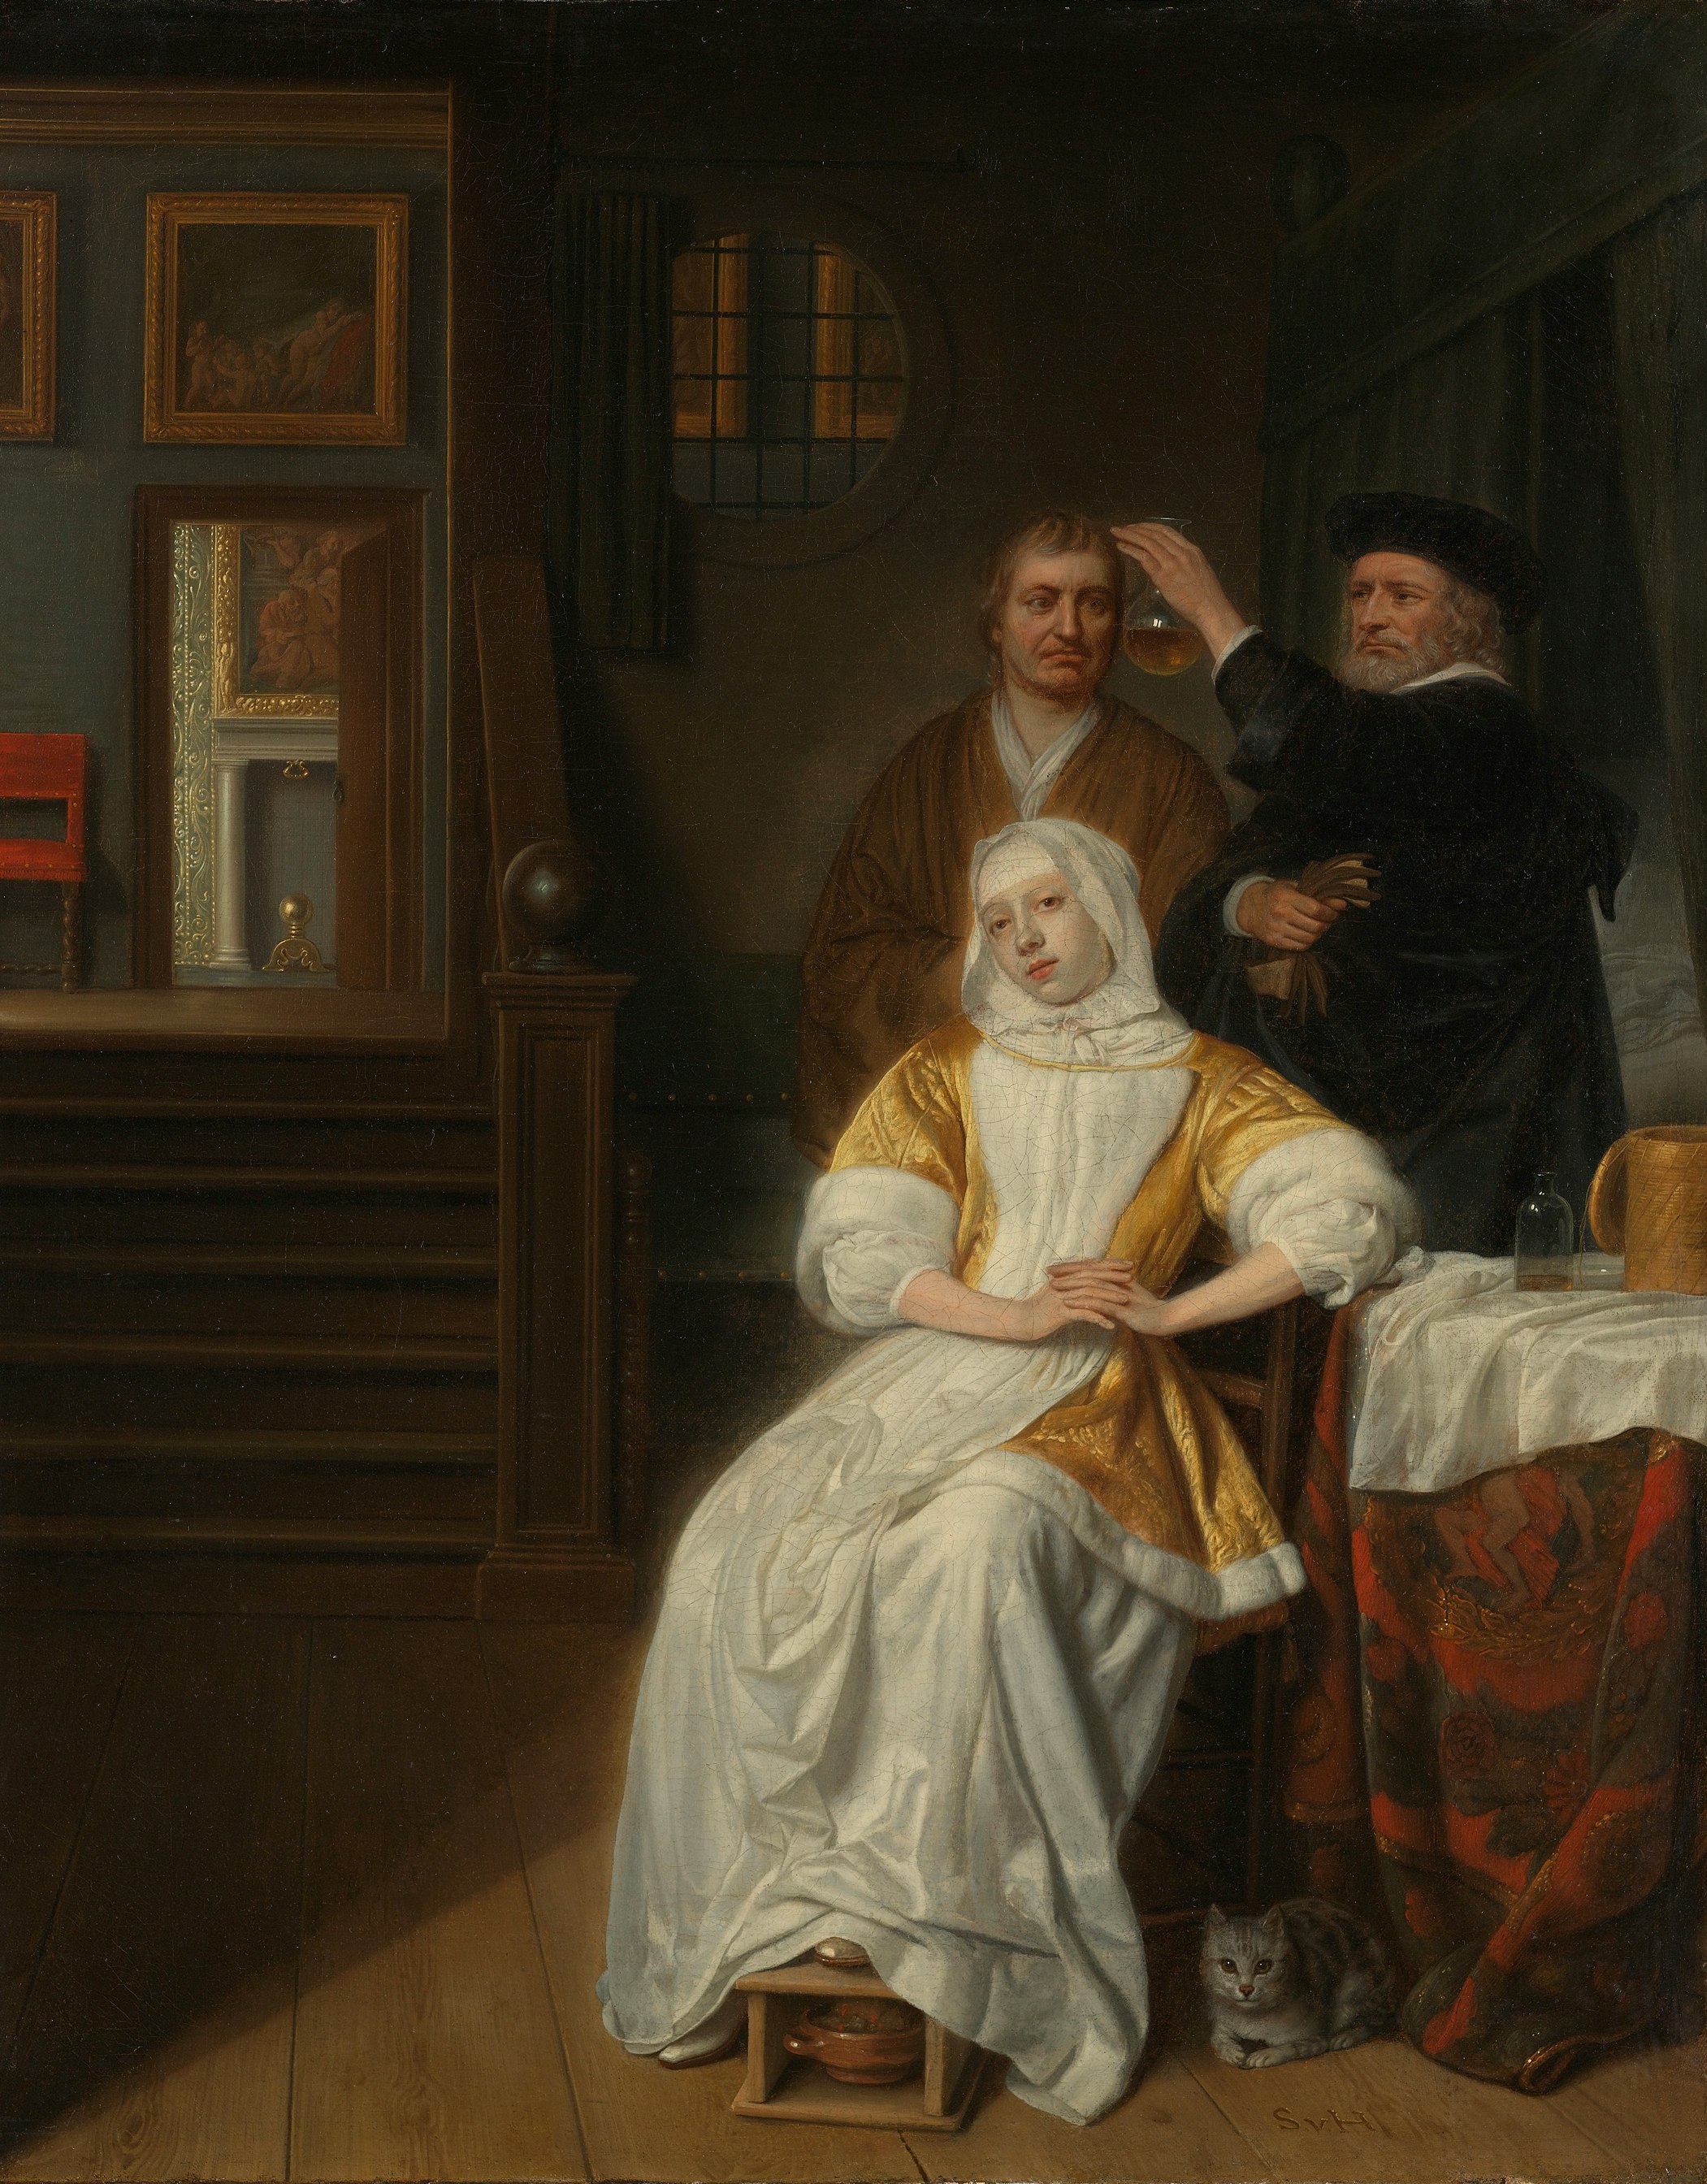 Title: 'The Anemic Lady'
Date: 1660.
Institution: Rijksmuseum.
Provider: Rijksmuseum.
Providing Country: Netherlands.
Public Domain